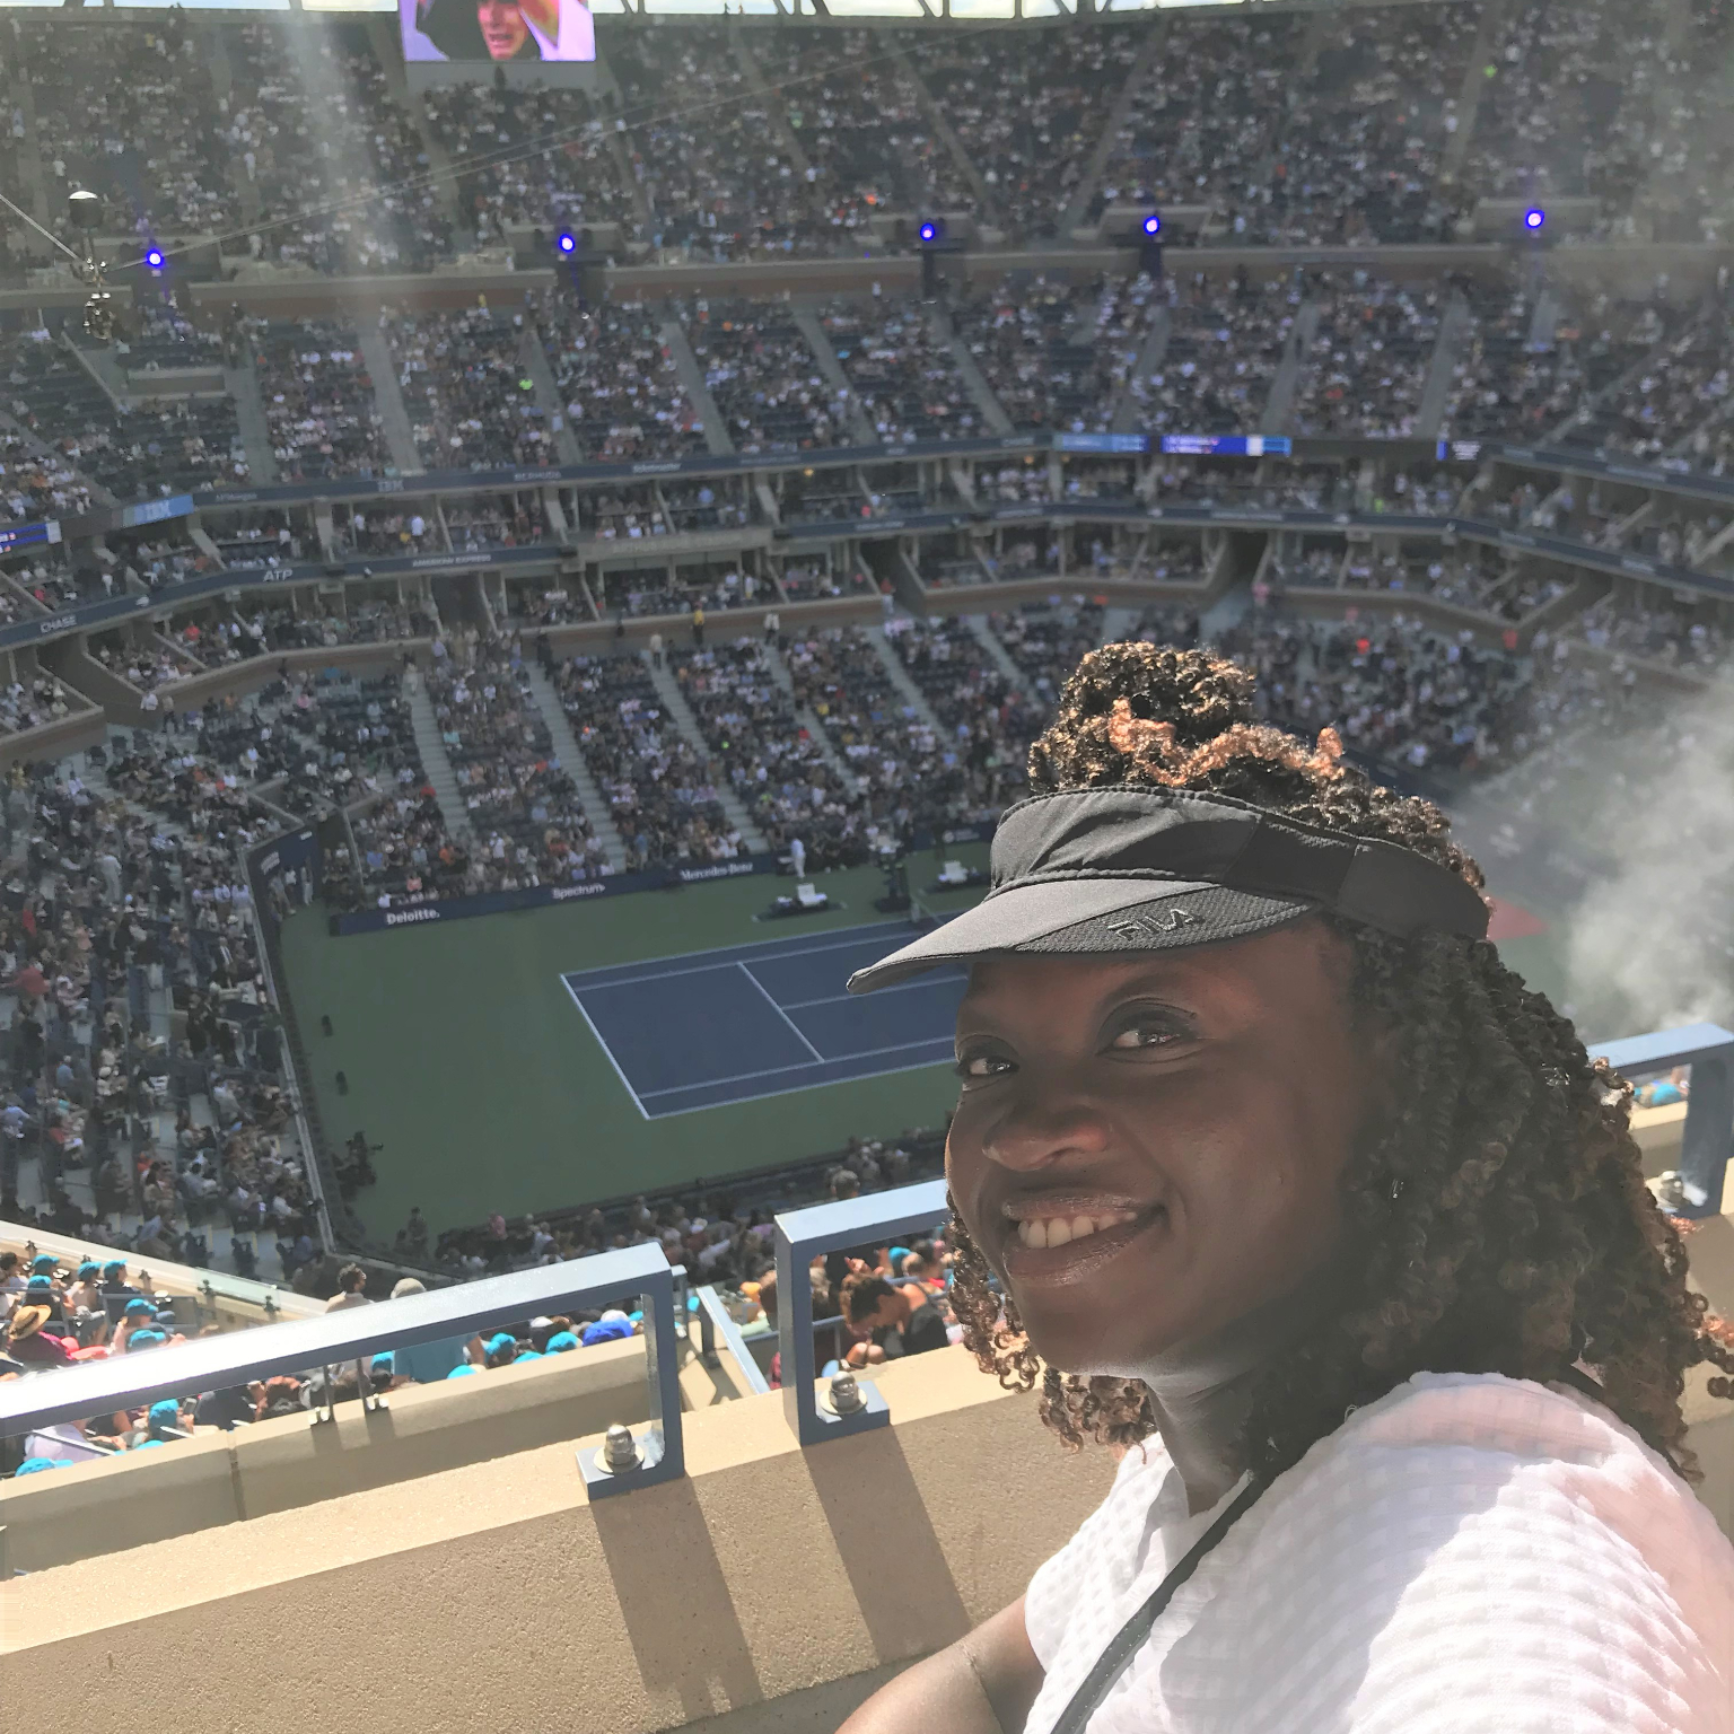 n New York City at the U.S. Open about to watch Serena Williams play the championship match!